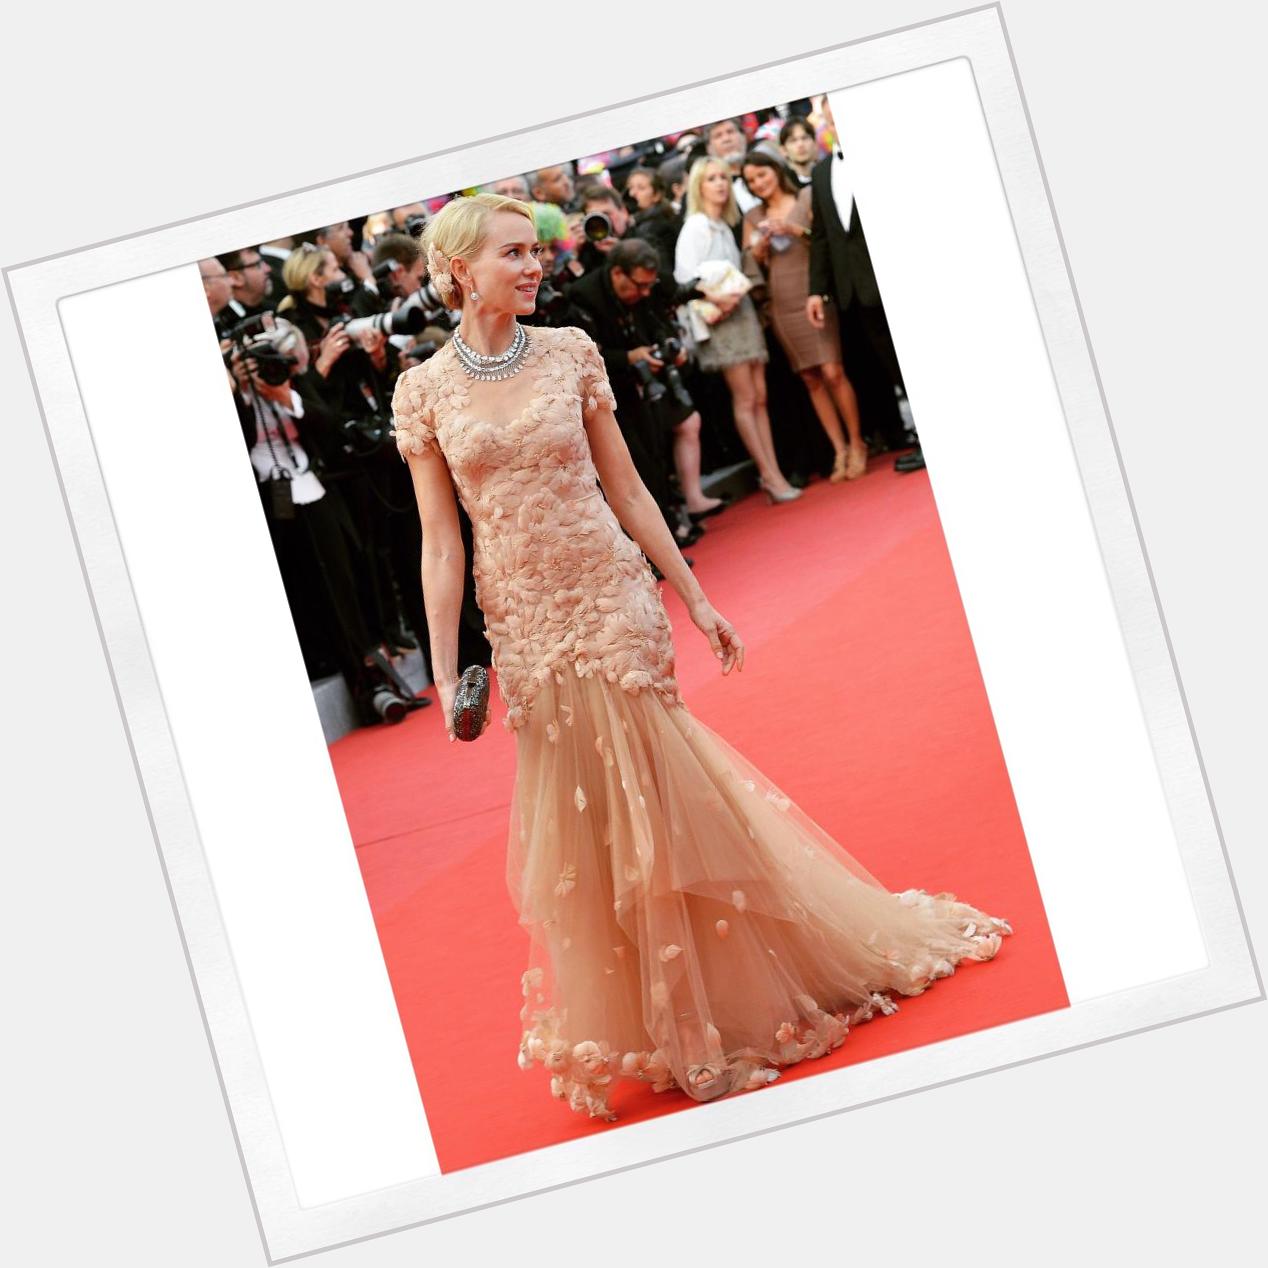 Timeless. X Wishing Naomi Watts a very Happy Birthday with a throwback of her wearing  